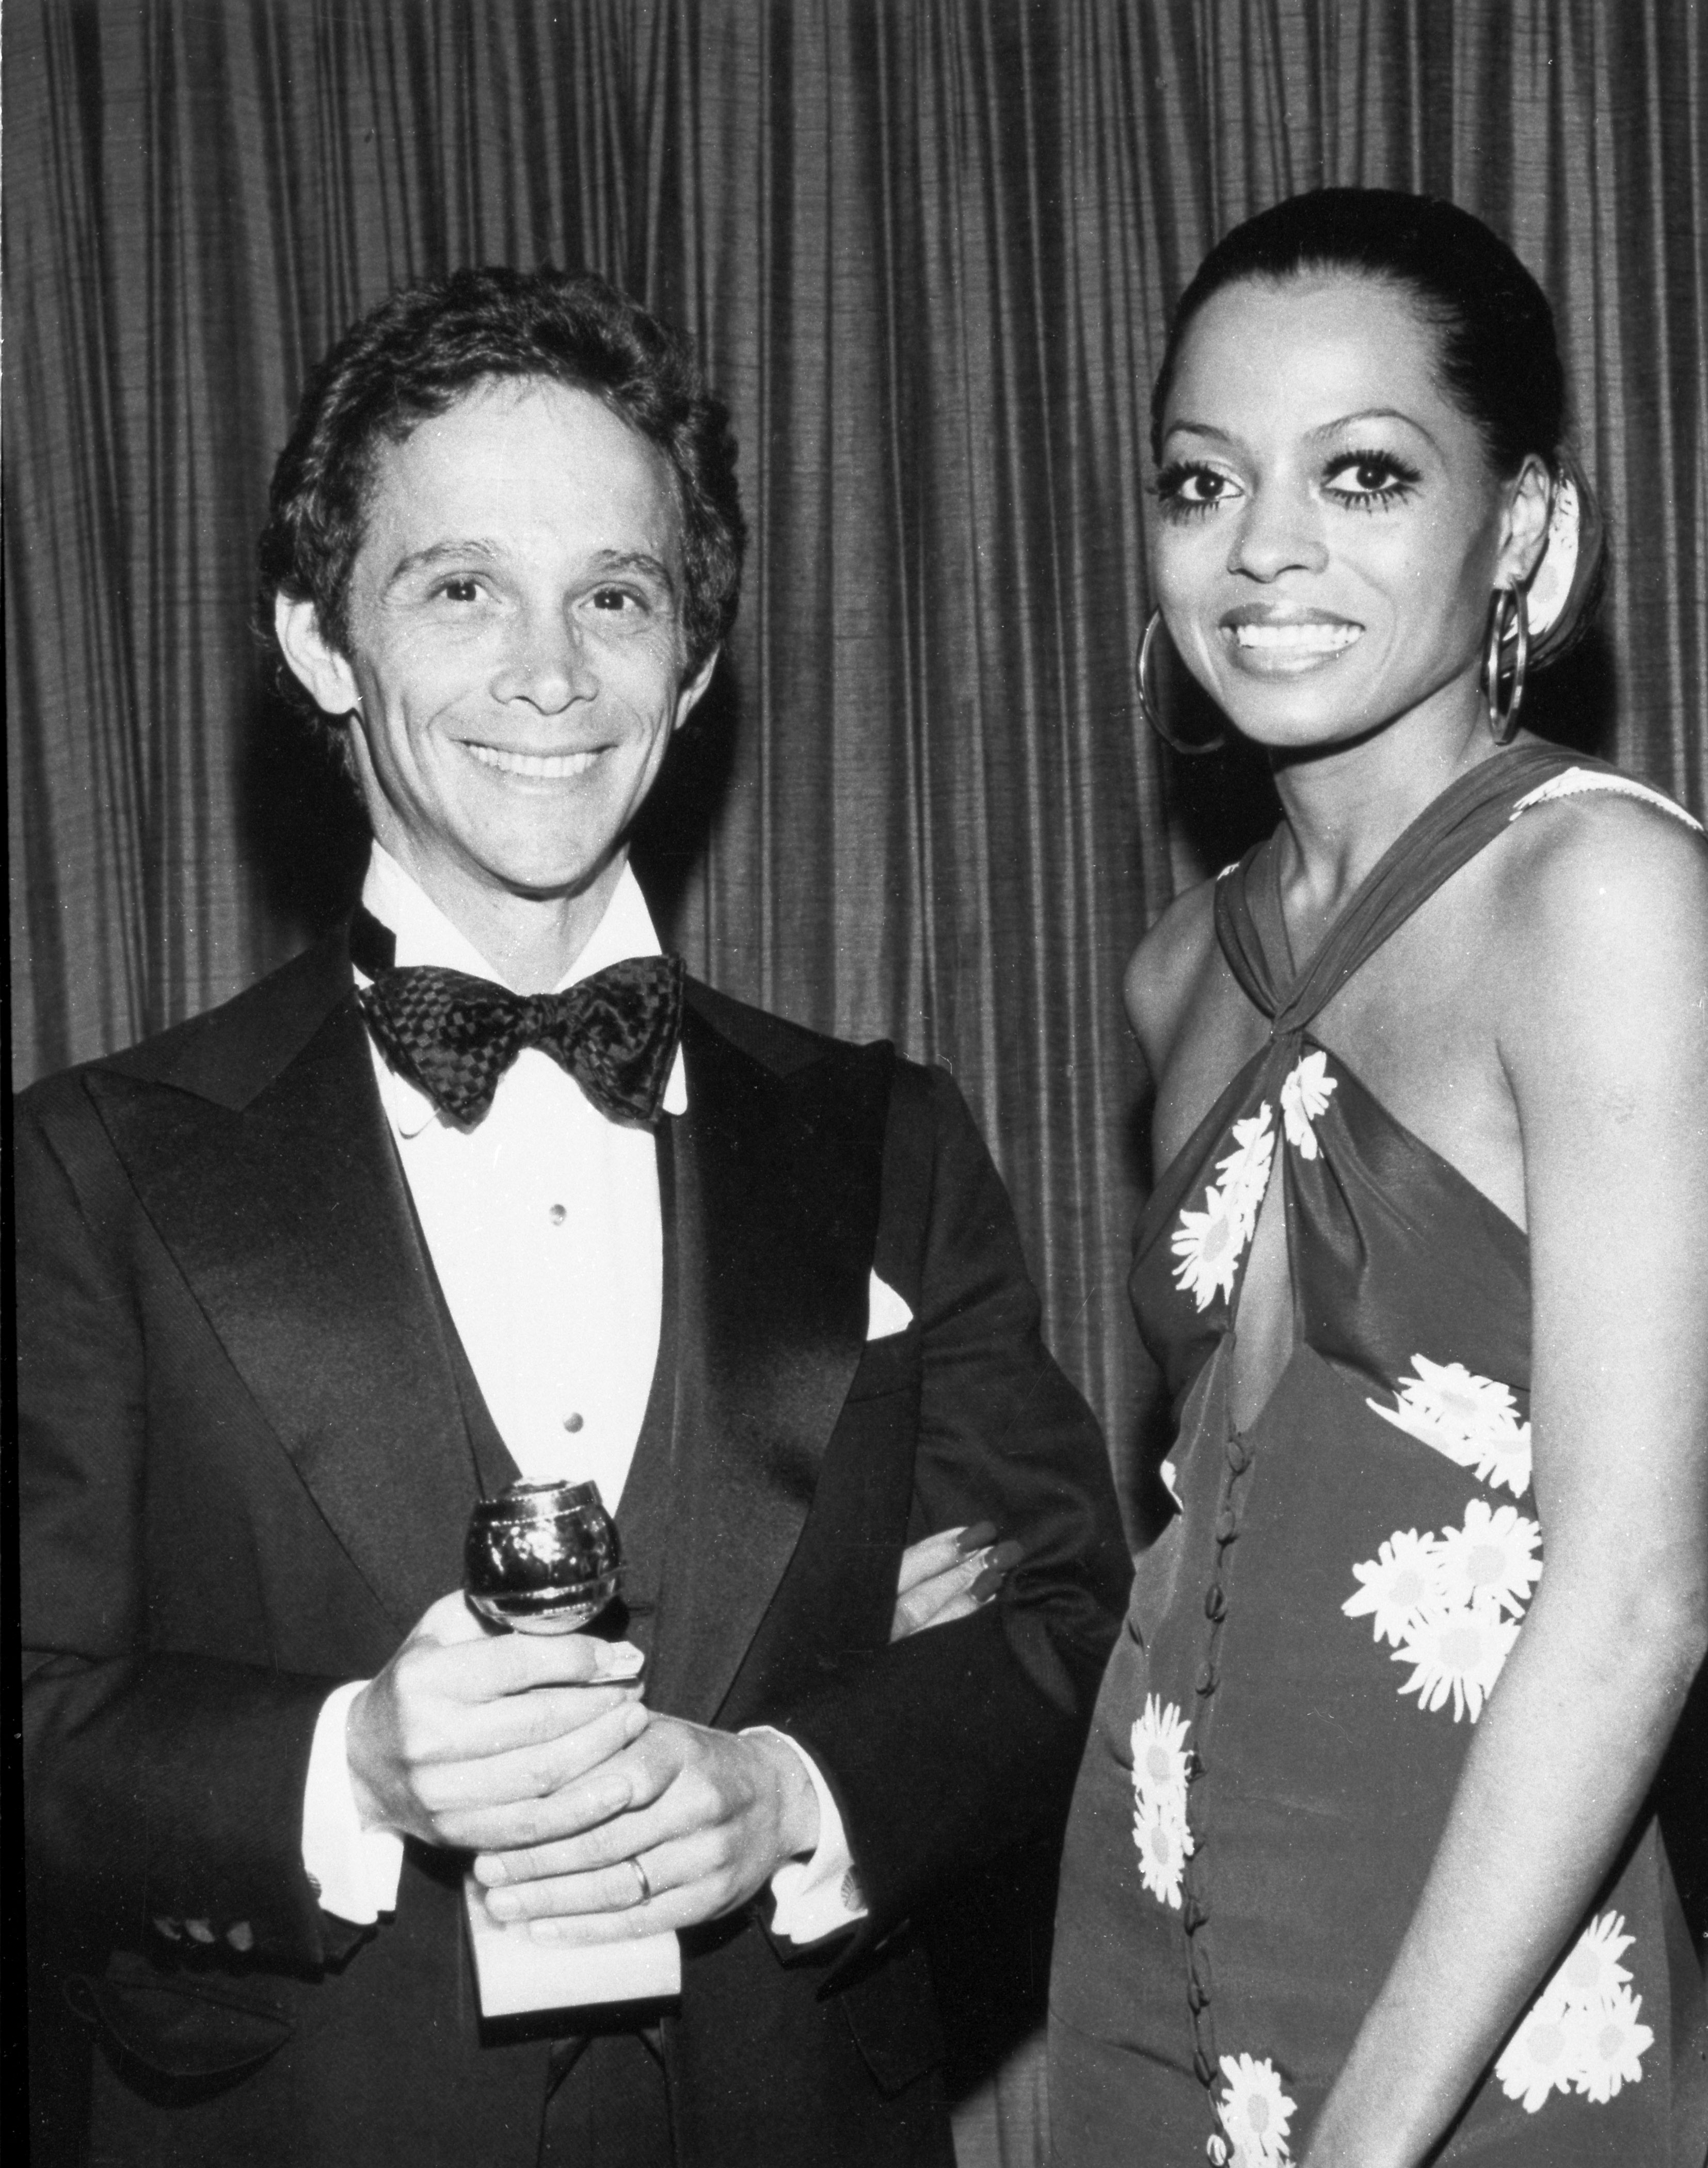 Joel Grey and Diana Ross at the 1973 Golden Globes